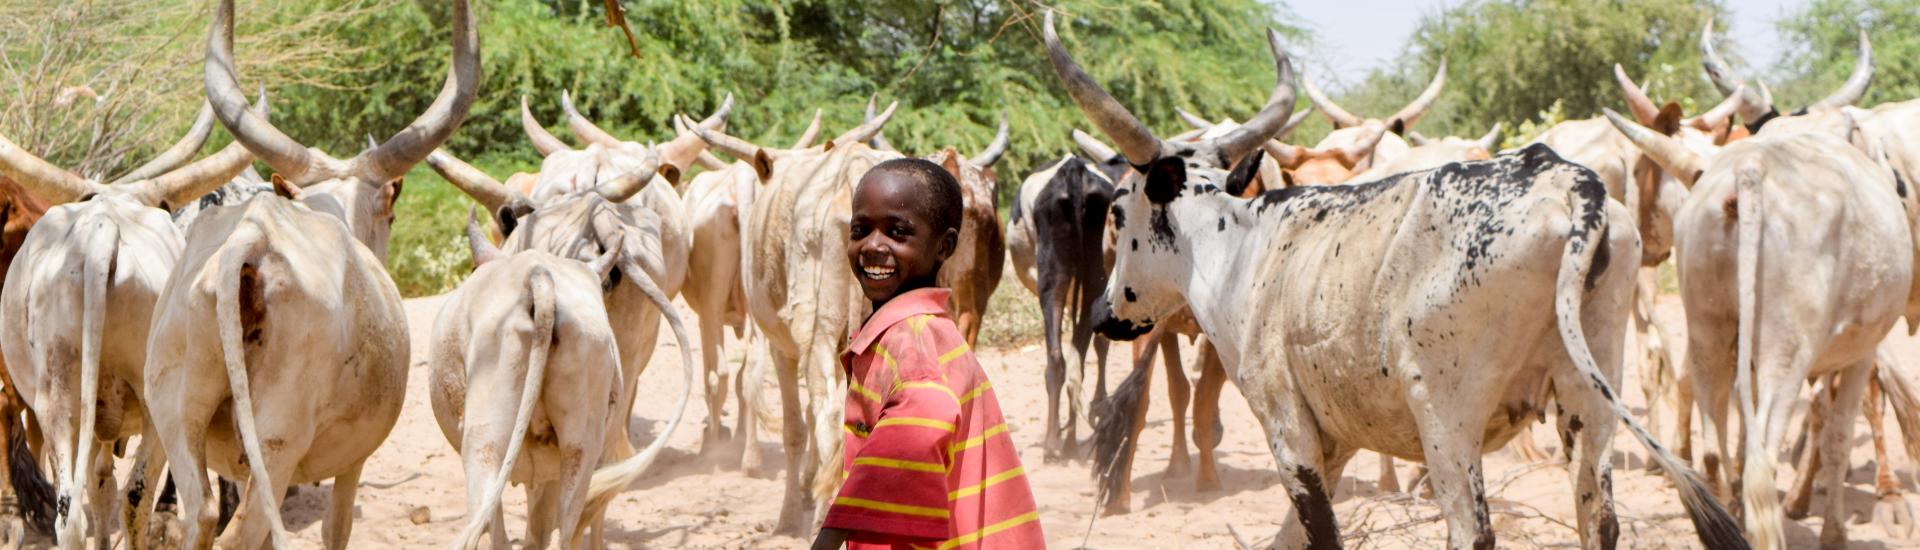 Child with cattle